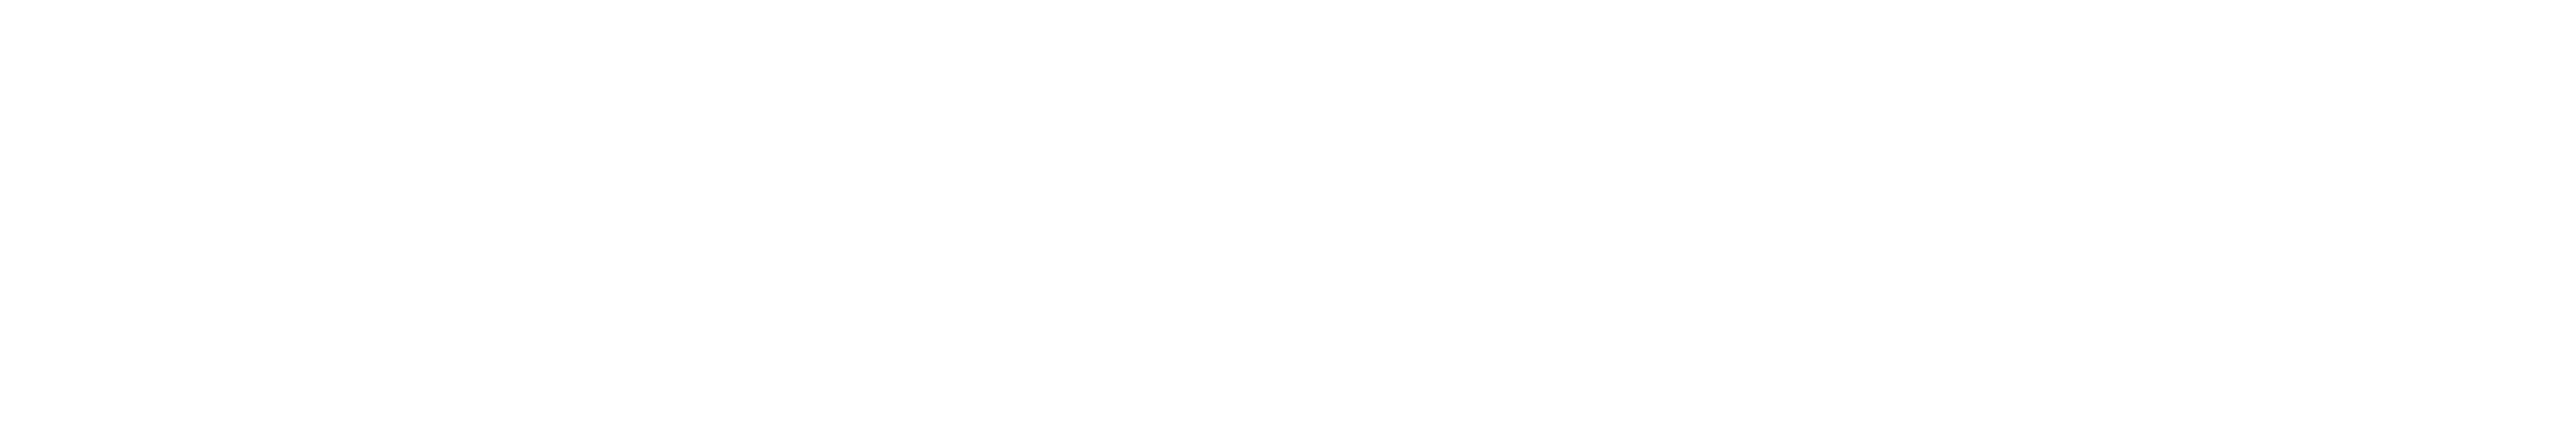 DownTown Toledo logo- link takes you to this page